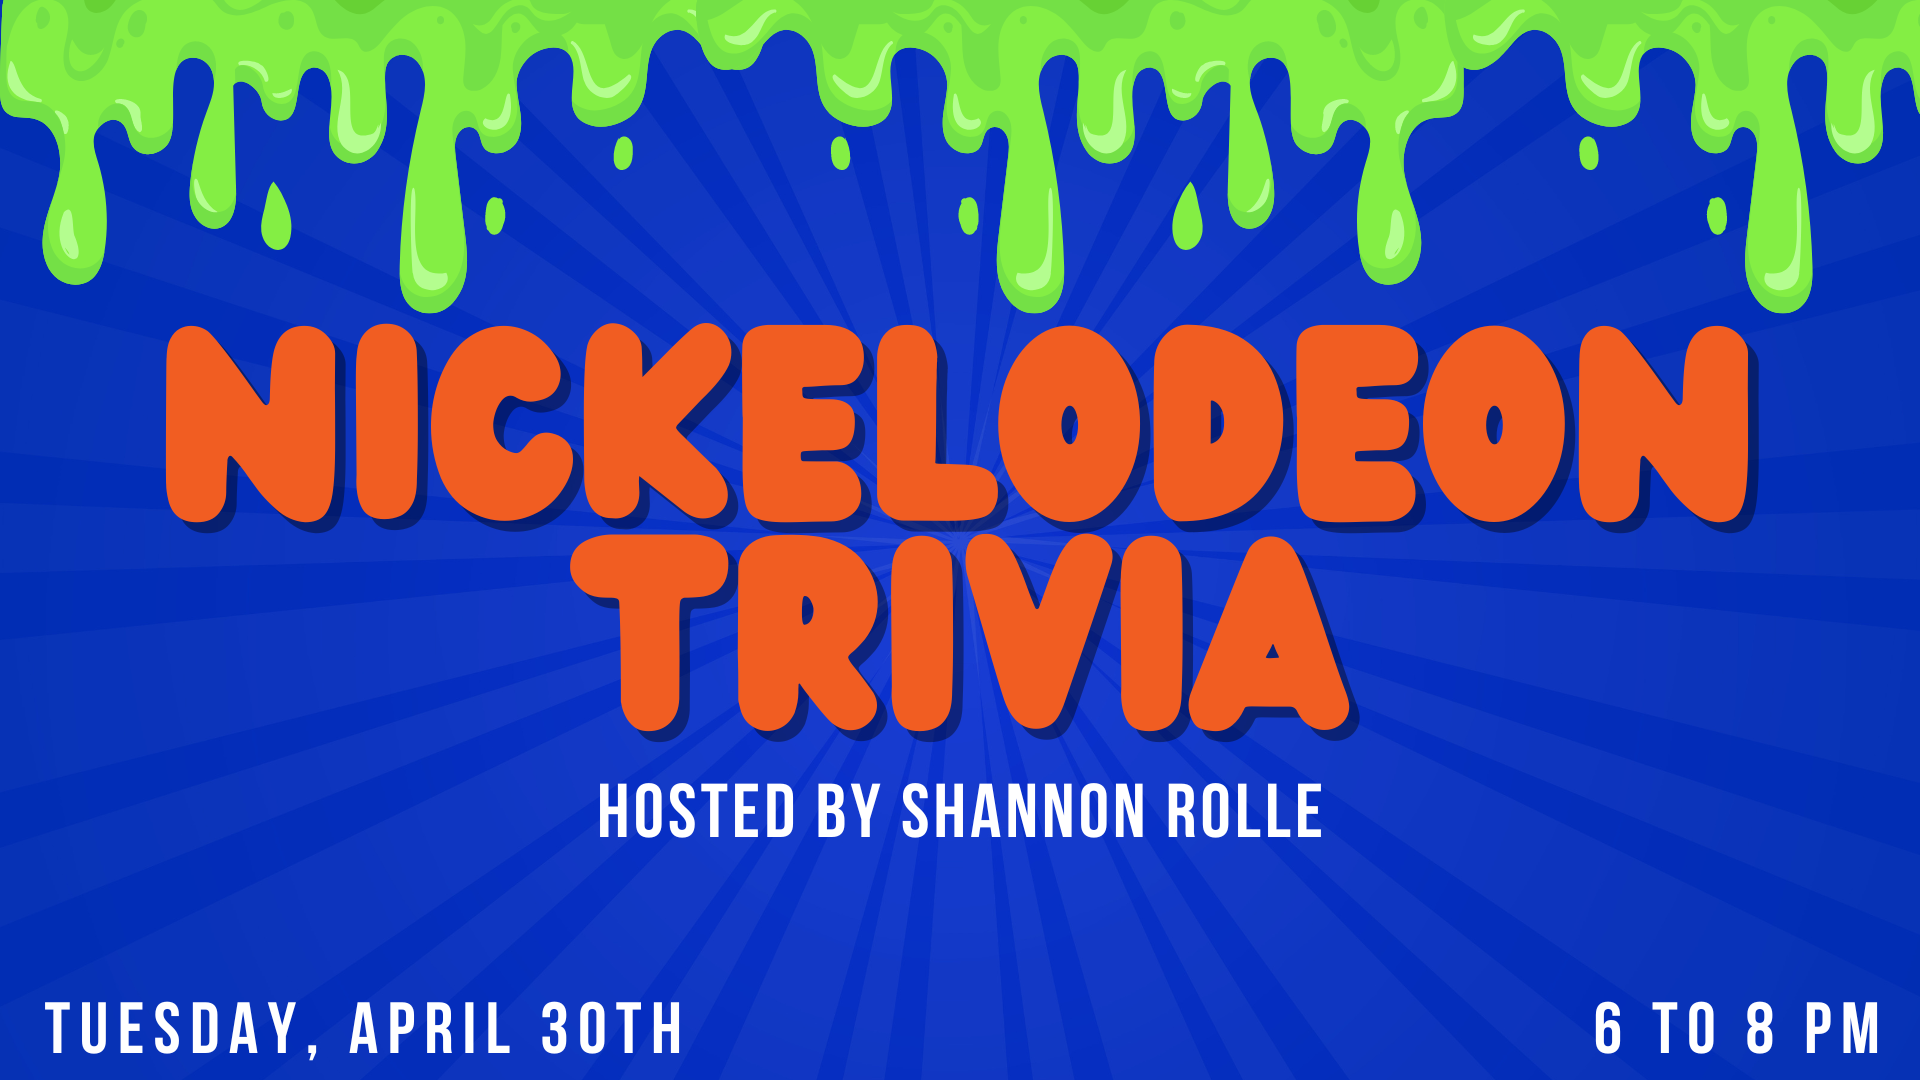 Nickelodeon Trivia hosted by shannon rolle on Tuesday, April 30th from 6 to 8 pm.